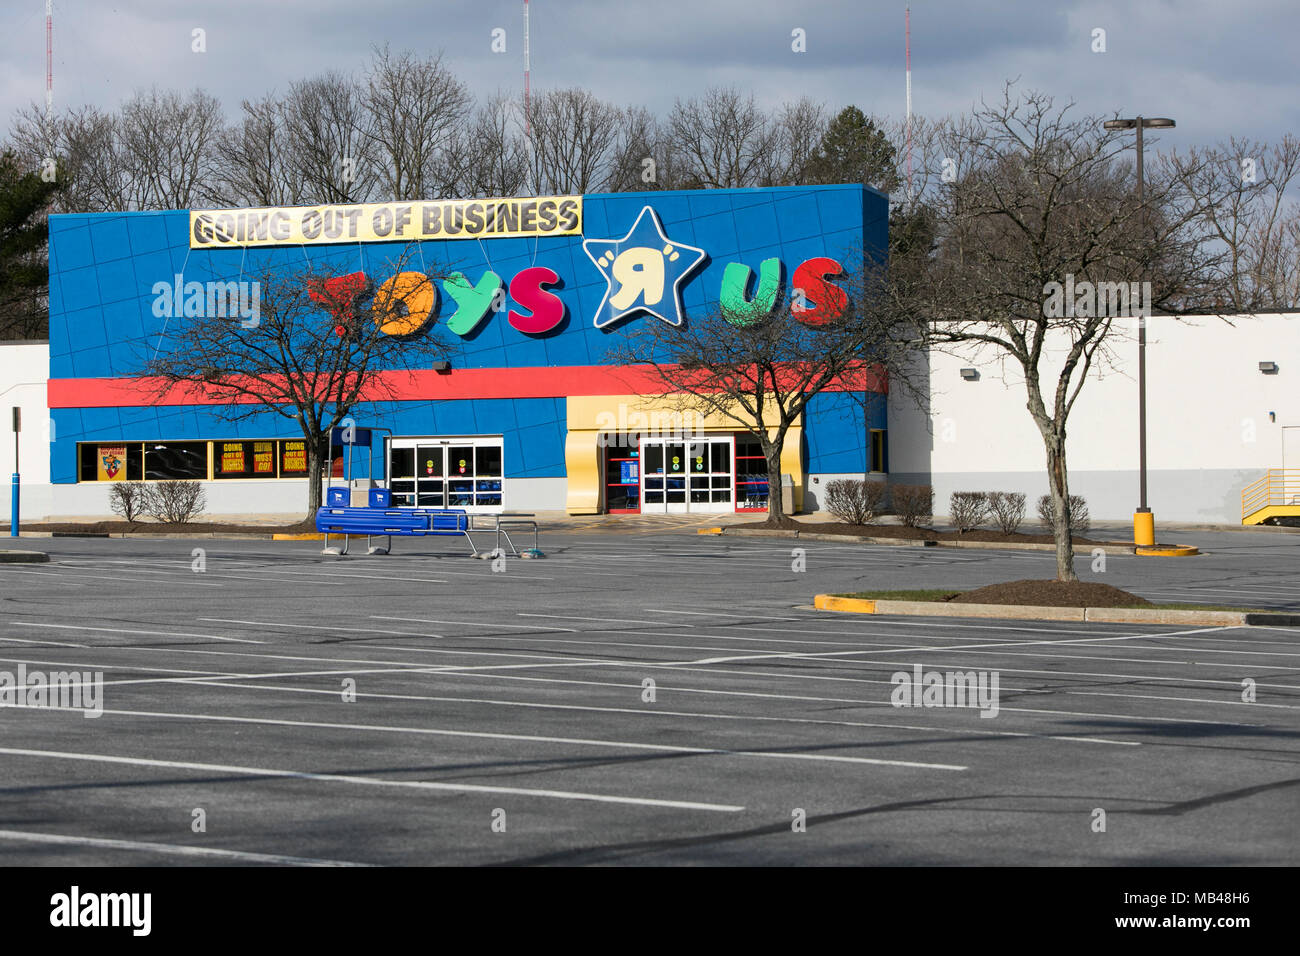 Frederick, Maryland, USA. 5th Apr, 2018. A logo sign outside of a Toys 'R' Us retail store in Frederick, Maryland with 'Going Out Of Business' signage on April 5, 2018. The toy retailer, which has struggled under a heavy debt load, announced its bankruptcy and plan to liquidate all of its stores in March. Credit: Kristoffer Tripplaar/Alamy Live News Stock Photo